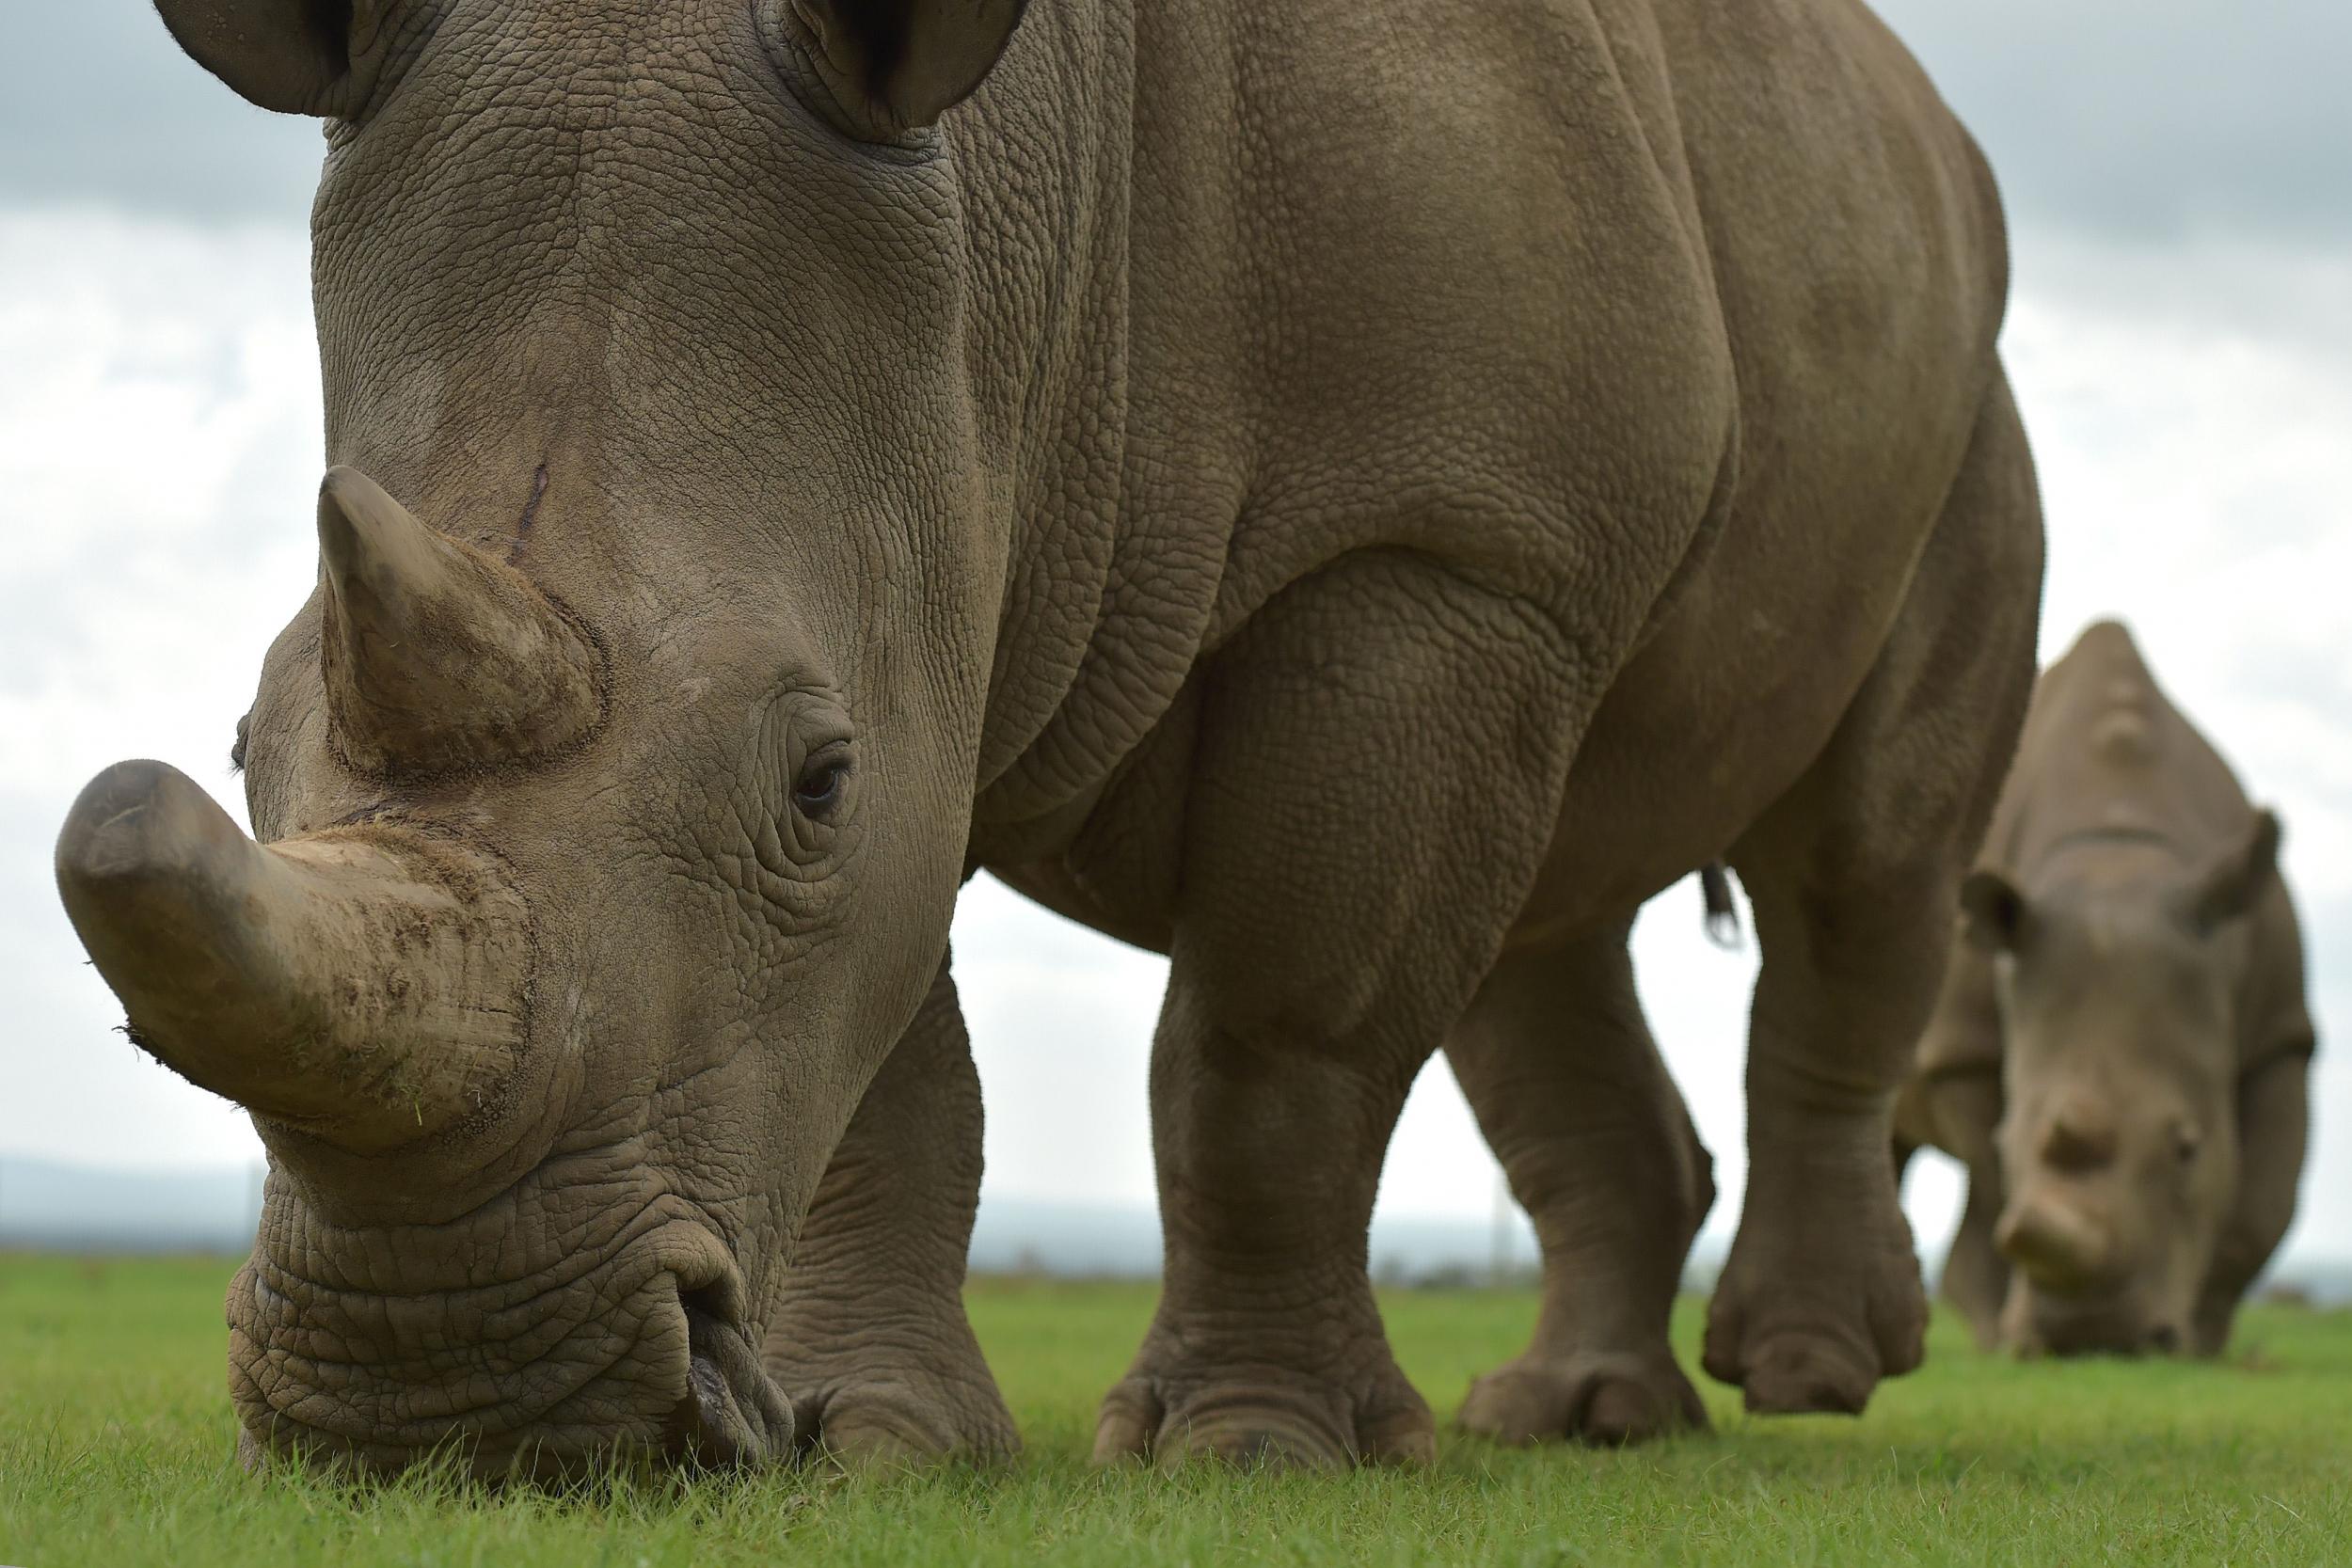 The world's last two remaining female northern white rhinos live in Kenya